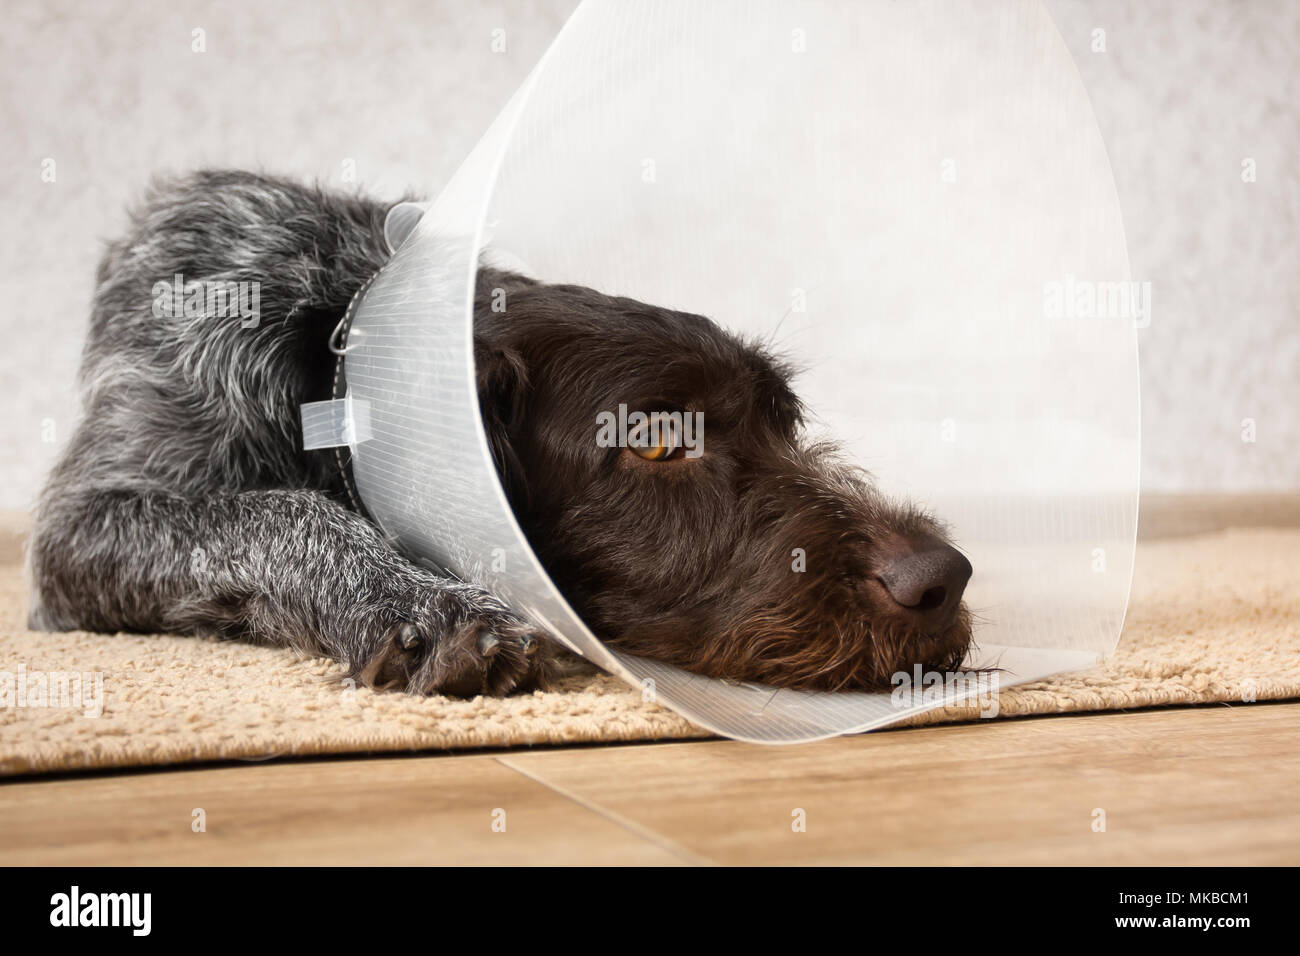 dog with elizabethan (buster) collar lying on the floor Stock Photo